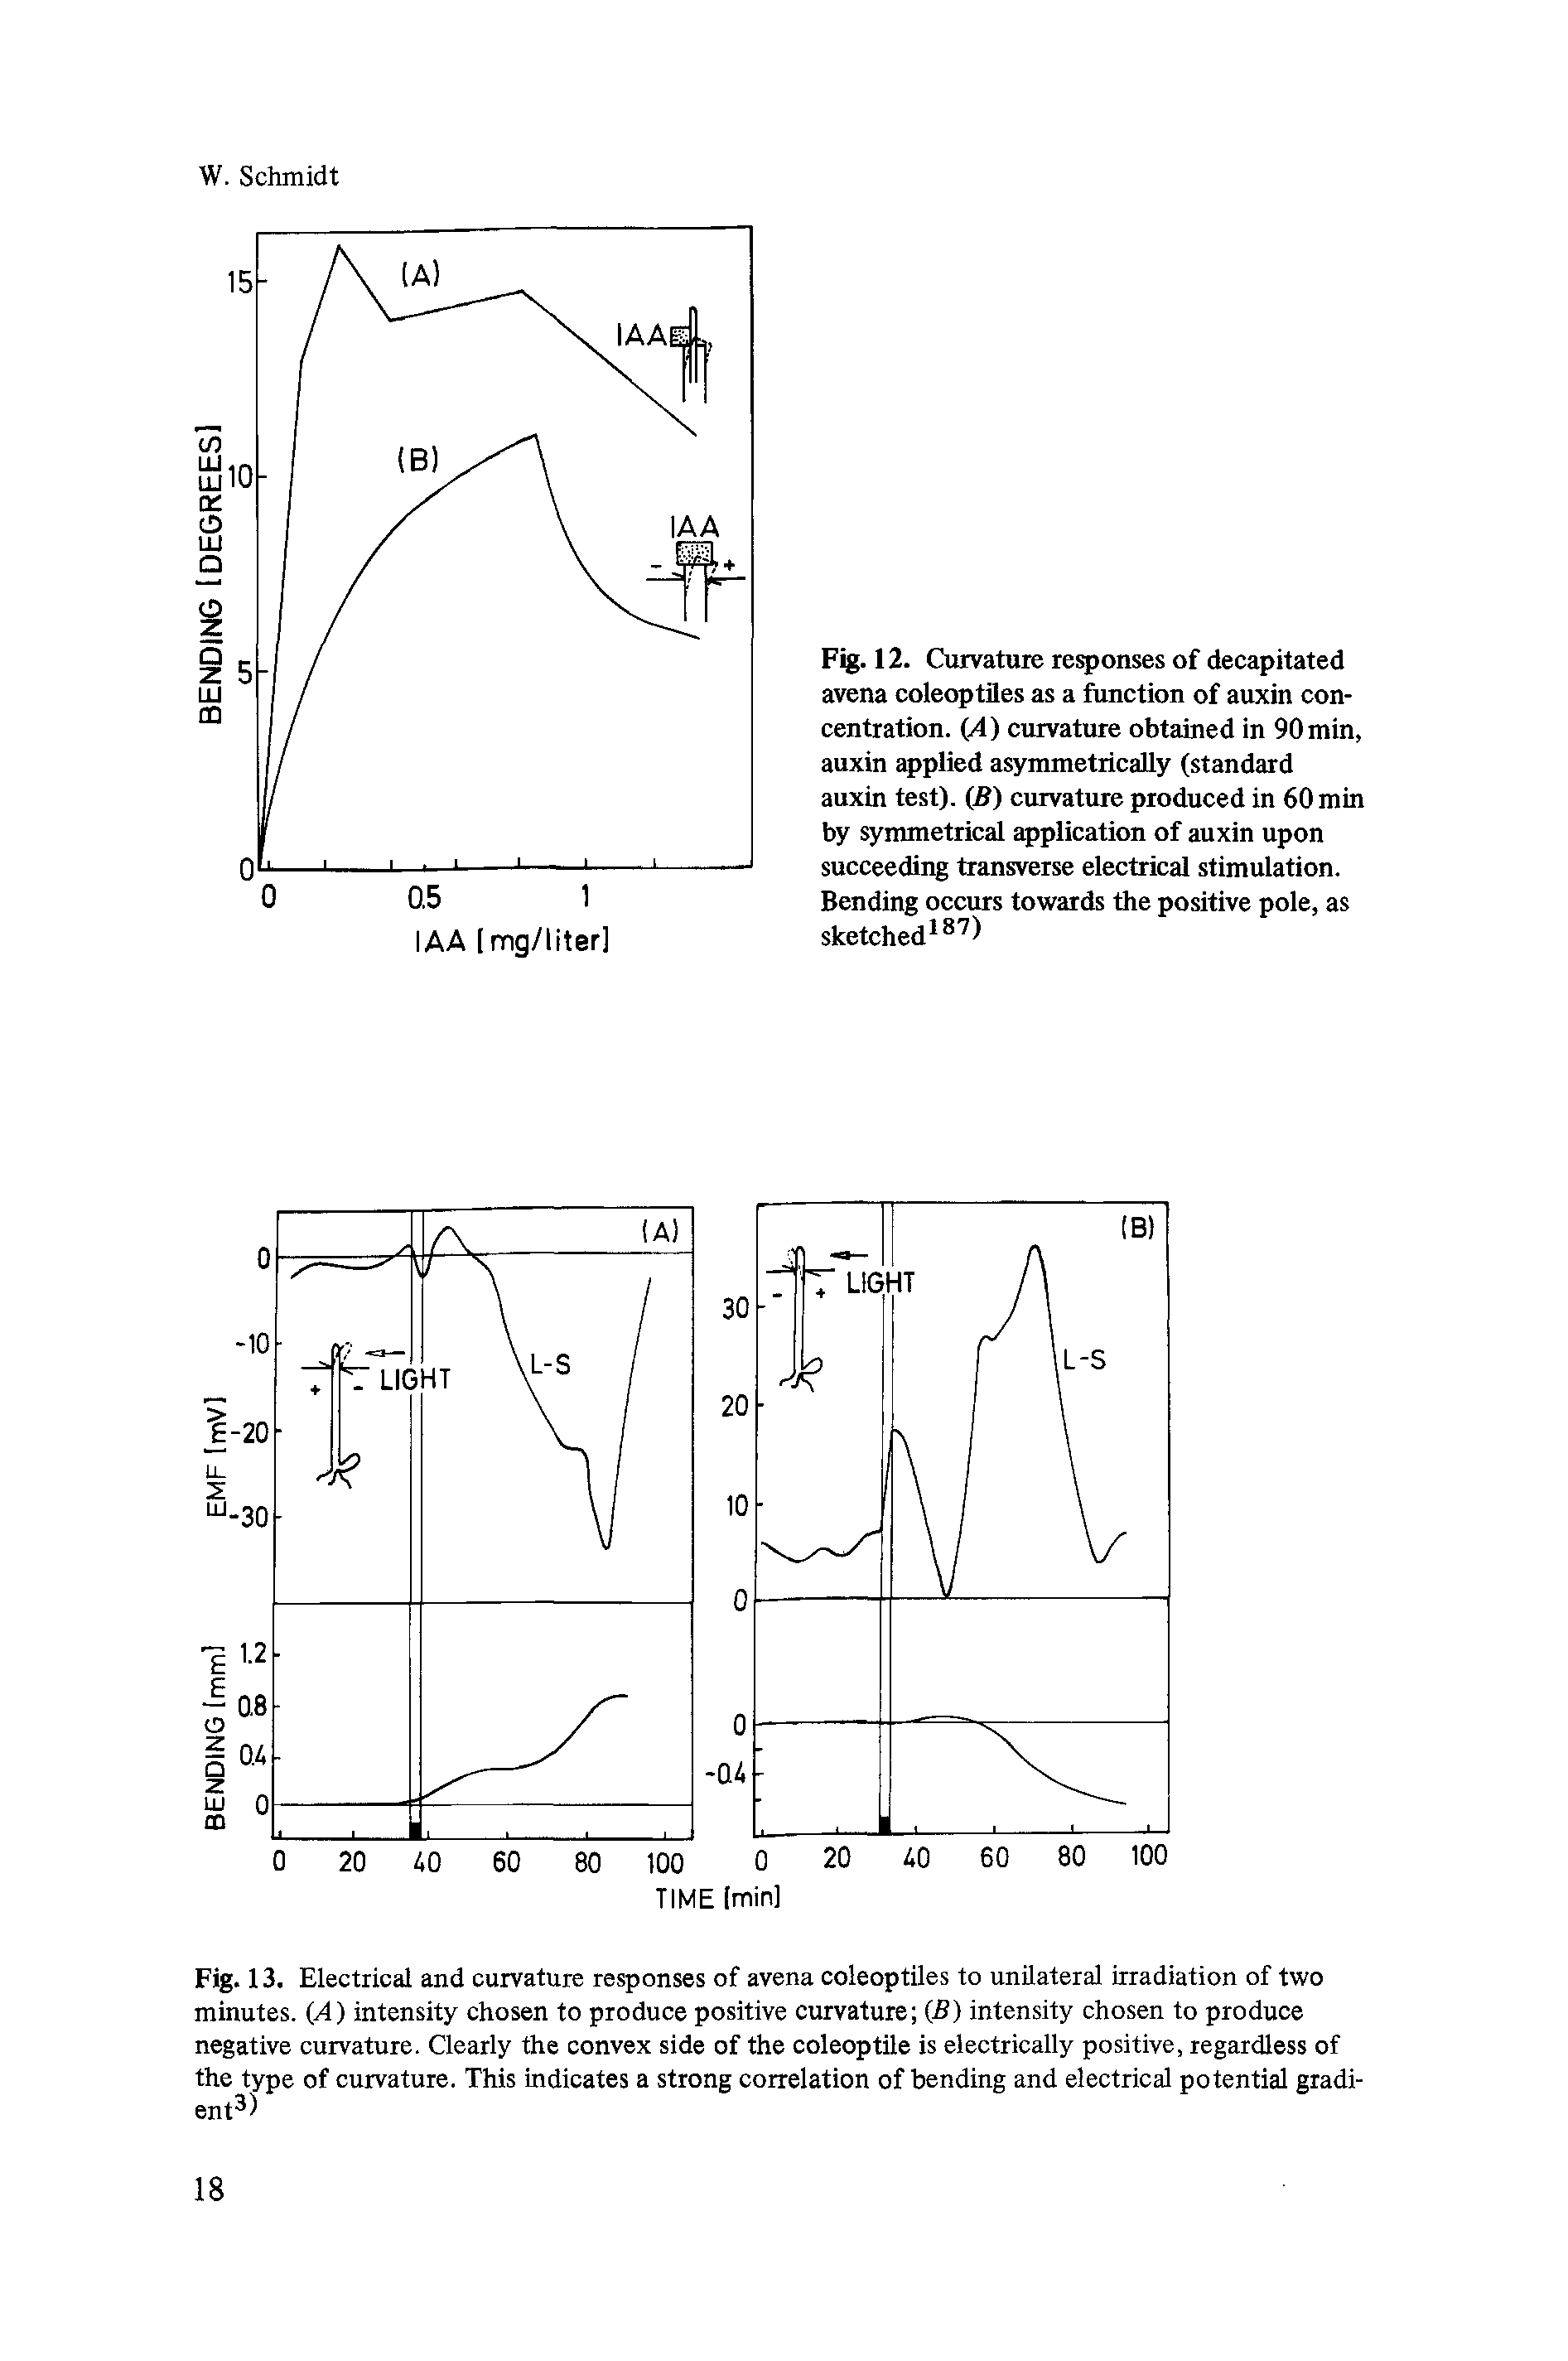 Fig. 13. Electrical and curvature responses of avena coleoptiles to unilateral irradiation of two minutes. (A) intensity chosen to produce positive curvature (B) intensity chosen to produce negative curvature. Clearly the convex side of the coleoptile is electrically positive, regardless of the type of curvature. This indicates a strong correlation of bending and electrical potential gradient3)...